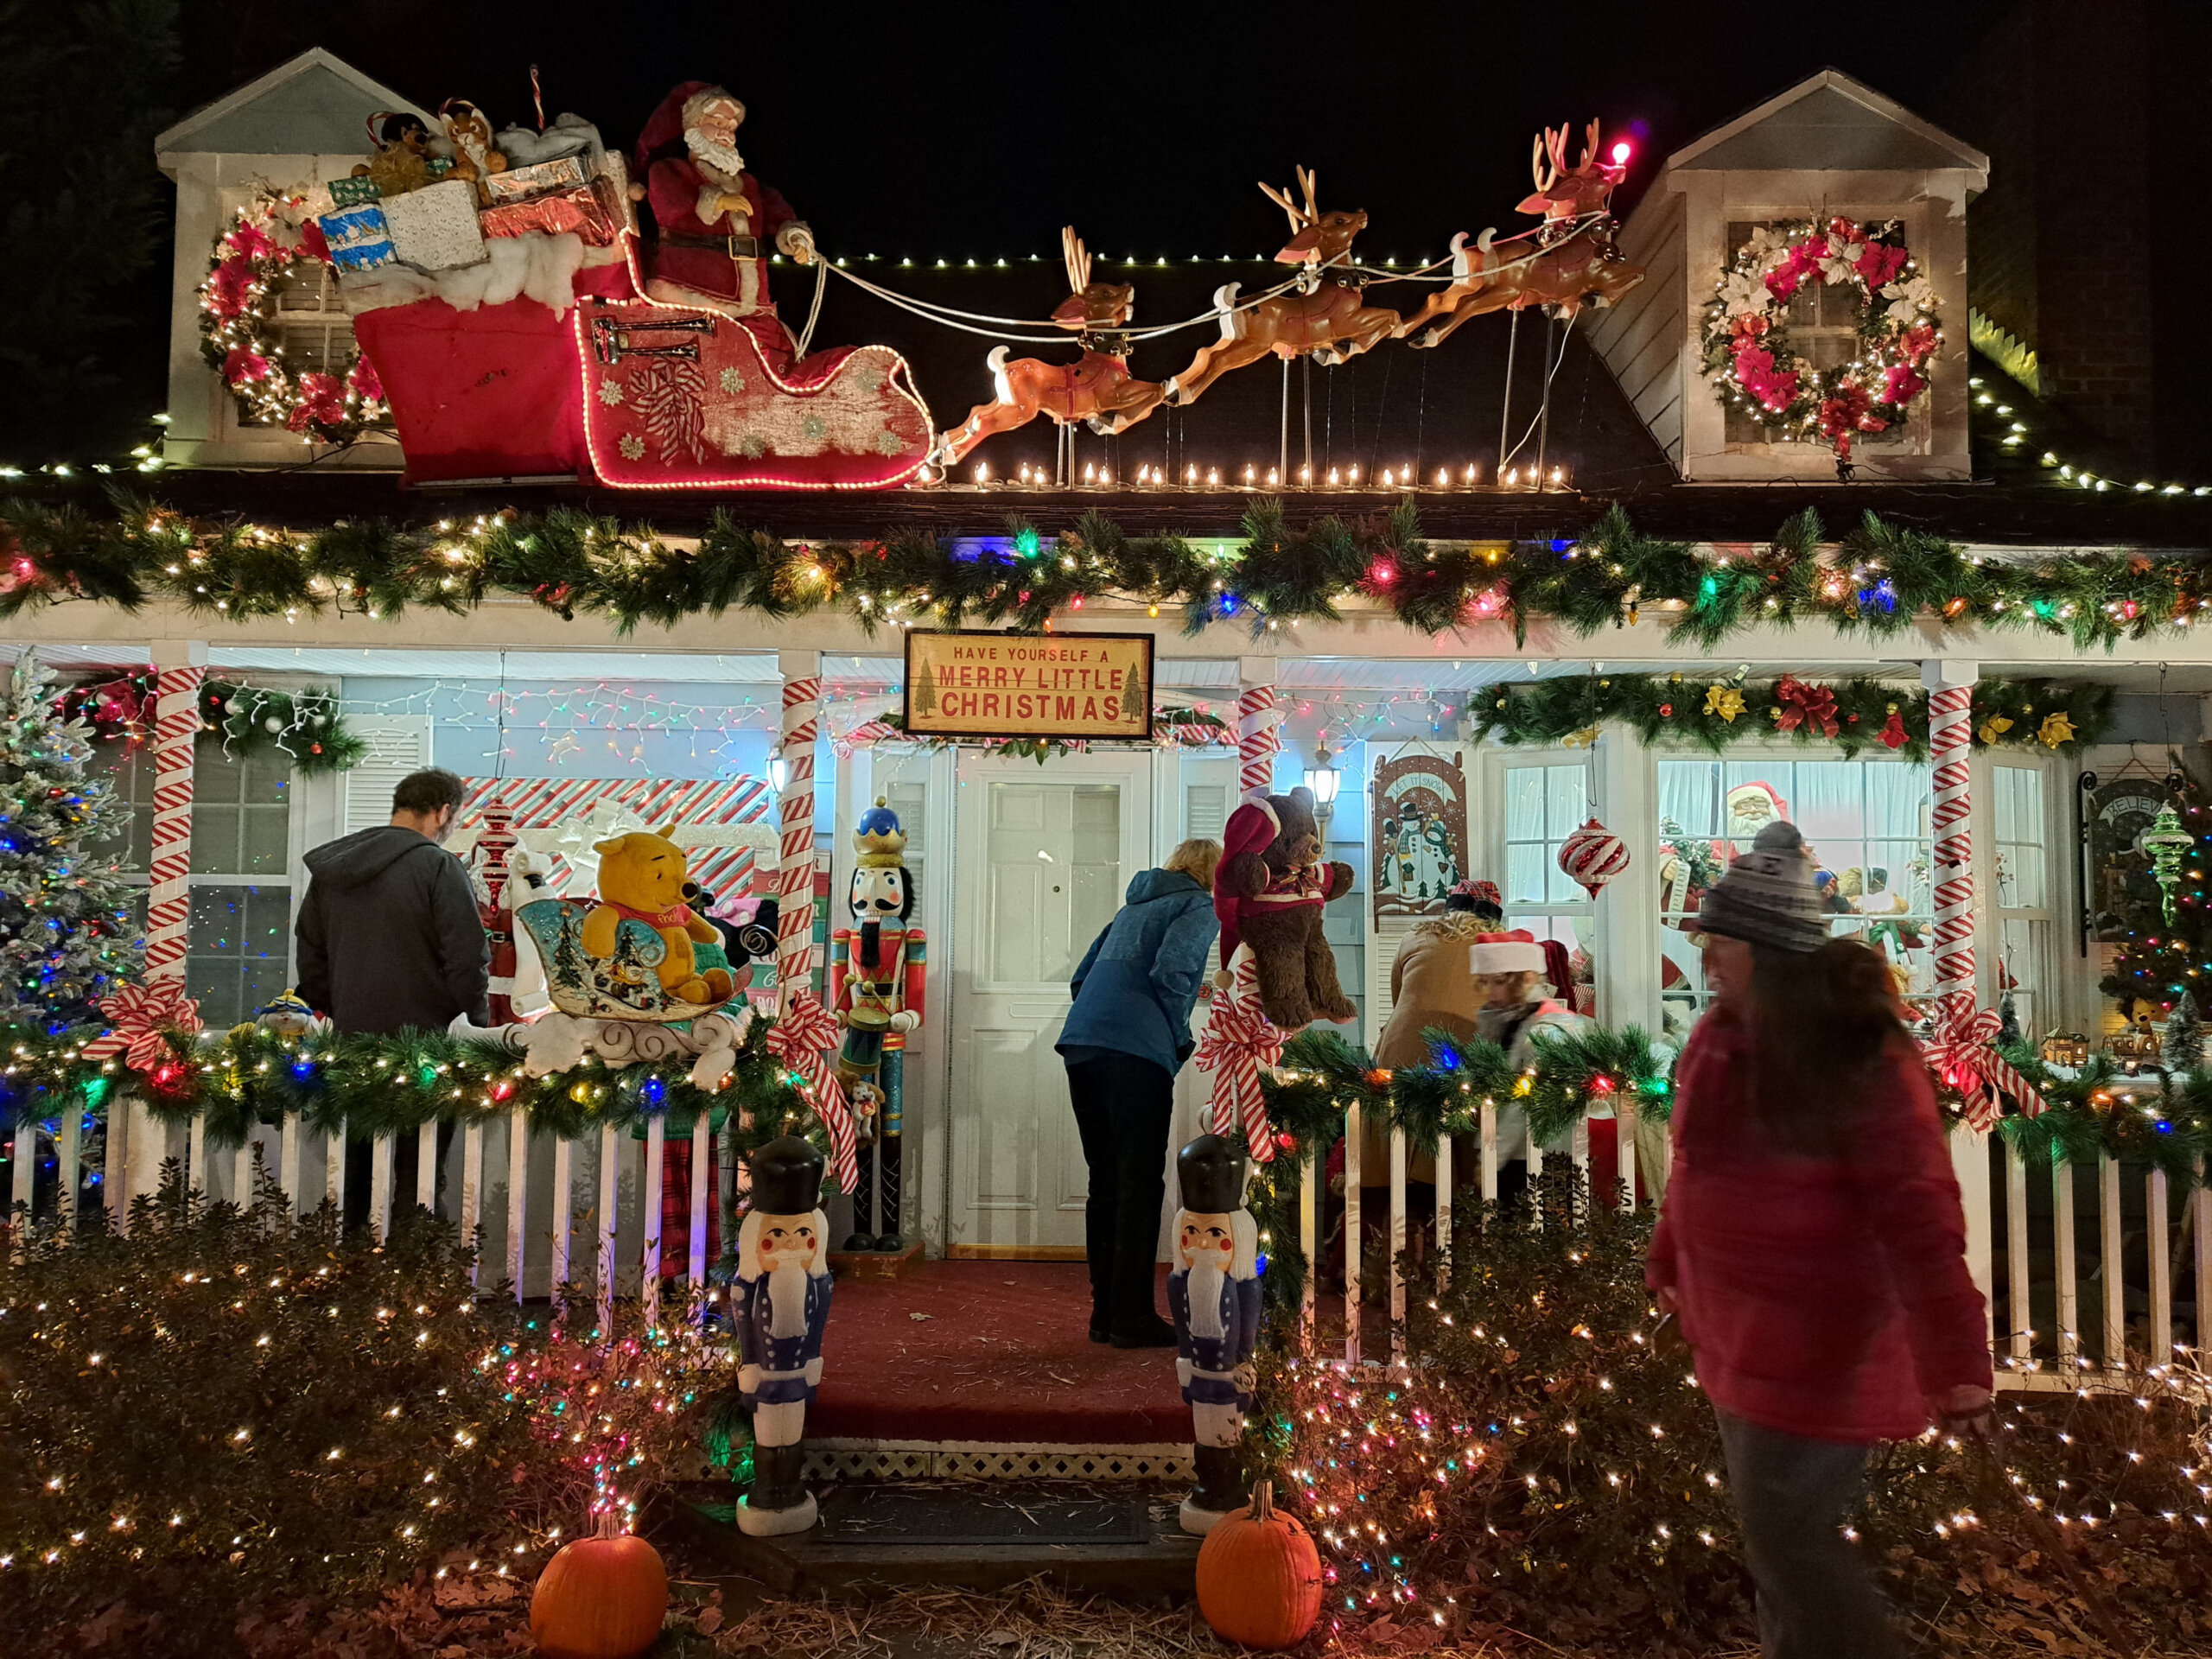 A longrunning Christmas tradition ends at ‘iconic’ Arlington home